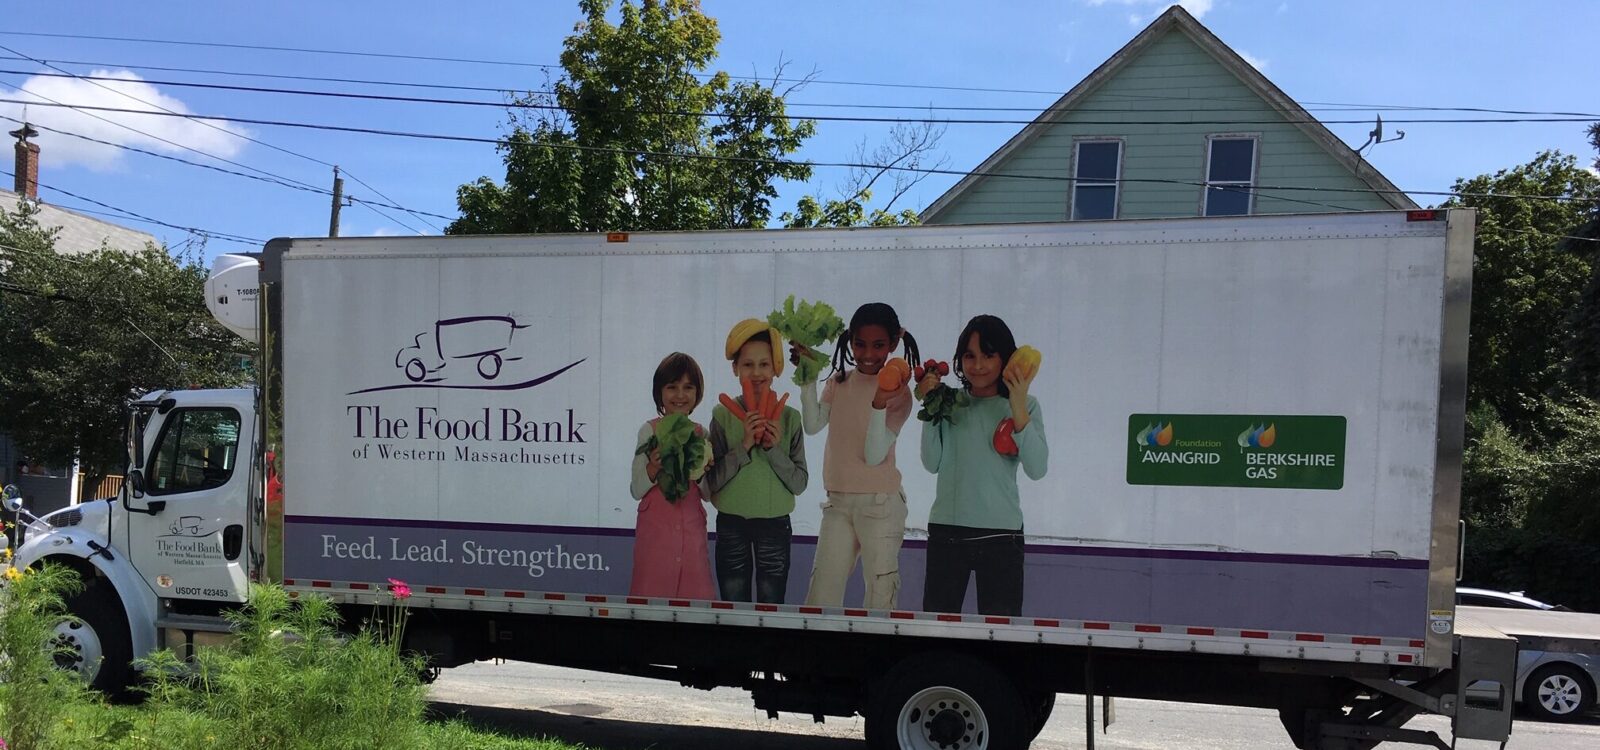 Food Bank truck arrives as Mobile in Turners Falls 4-6-20